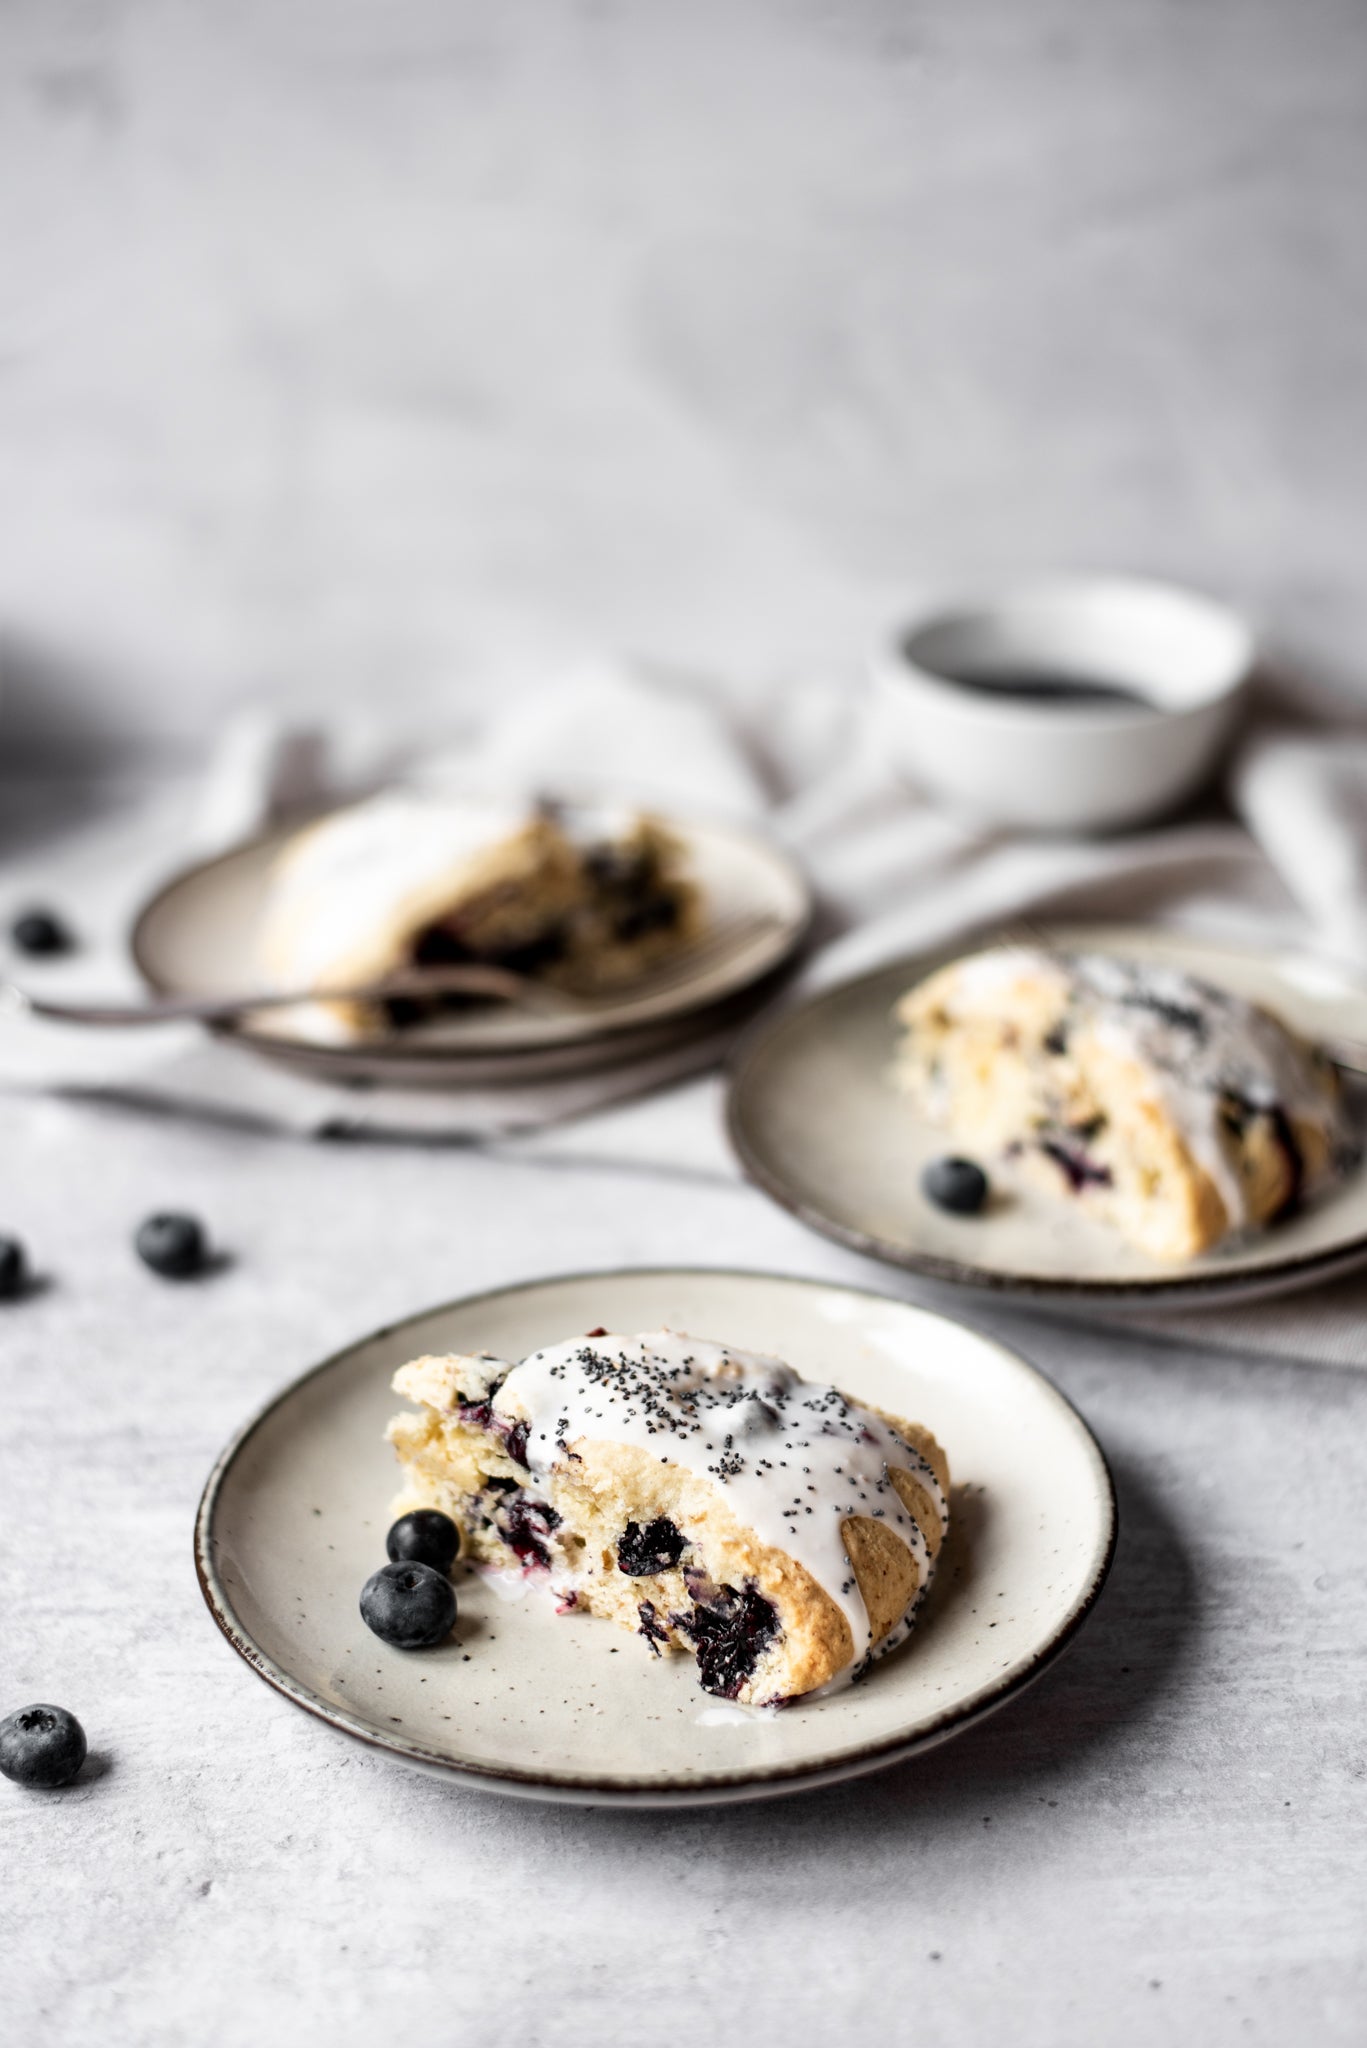 Summer-Berry-Scones-With-Lemon-Drizzle-Poppy-Seeds-WEB-RES-7_1.jpg